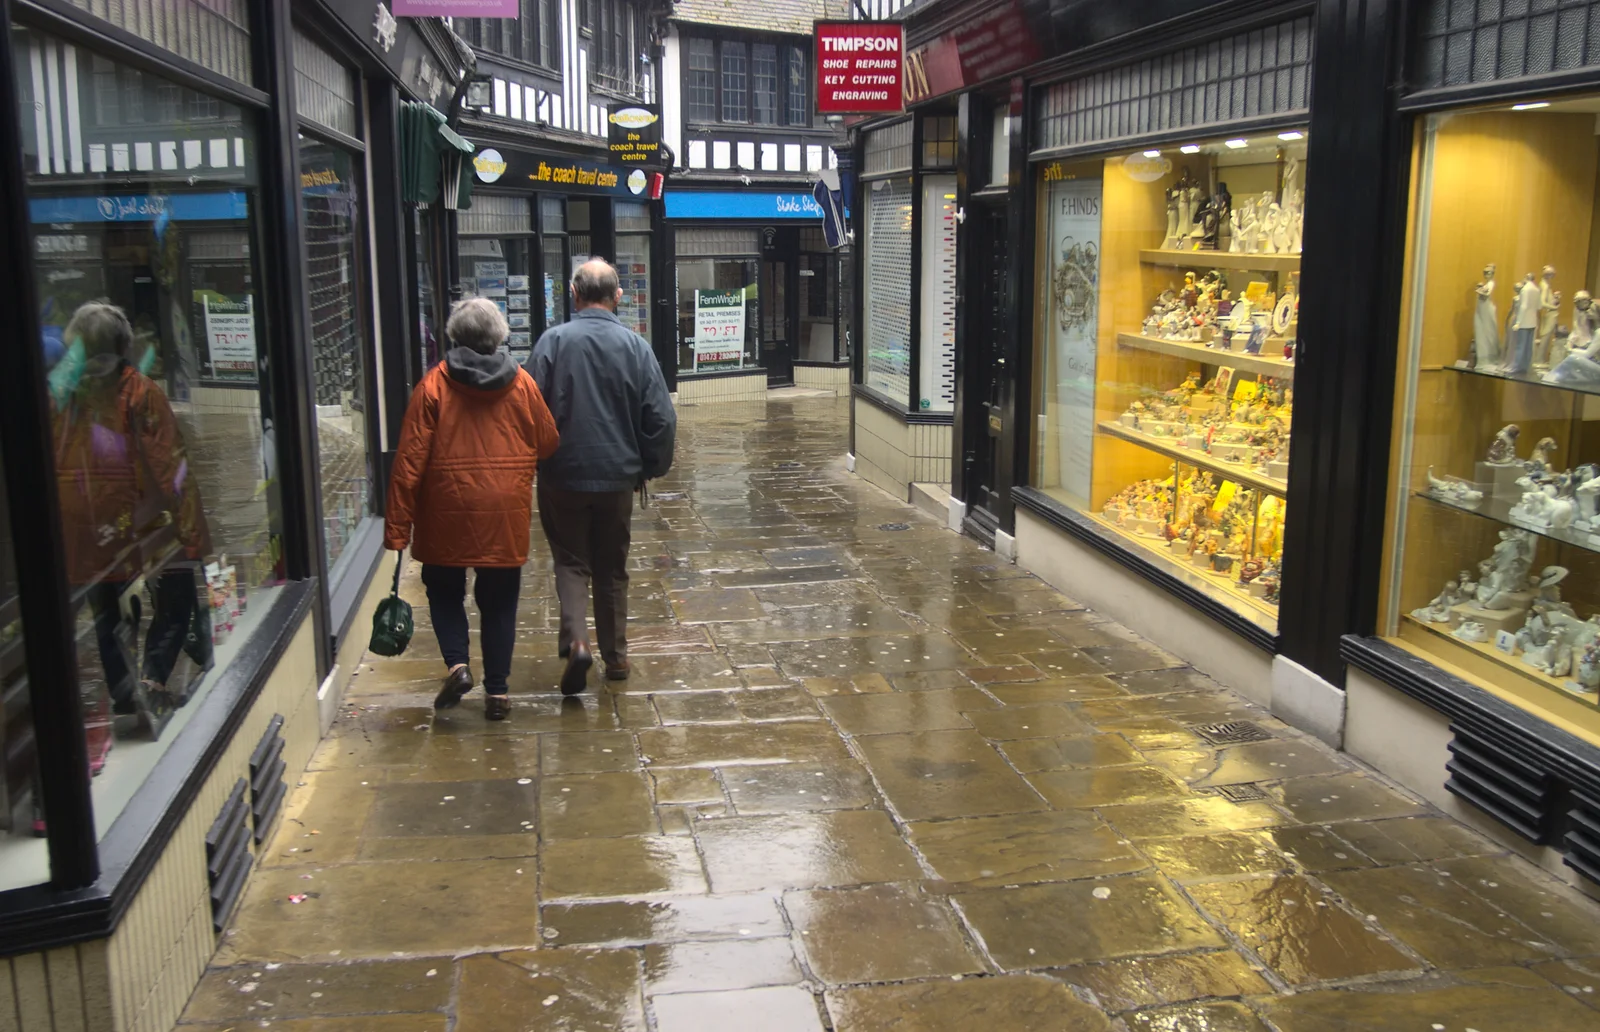 The rainy flagstones of Ipswich, from Evelyn and "Da Wheeze", and Lunch at the Cock Inn, Brome, Ipswich and Diss - 9th April 2012